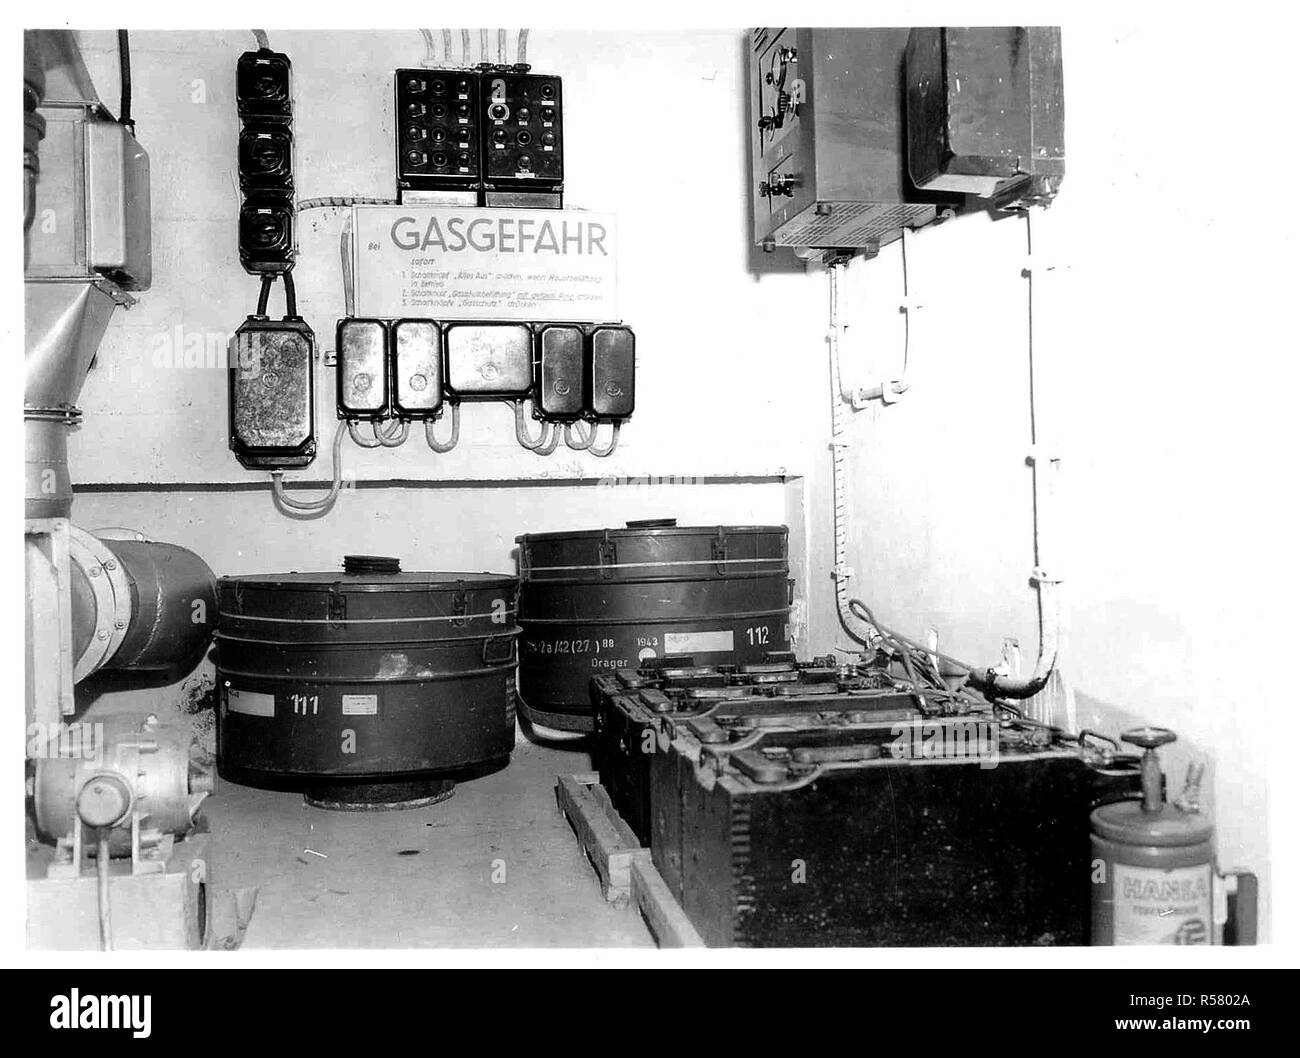 Original Caption: An abandoned German installation in the hills northwest of Soissons, shows the air conditioning and gas filtering unit inside the air raid bunkers. Intake and outlet pipes are on the left. Spare filter units are shown lower center, below the switchboard and fuse boxes. On wall to right is master control box, above row of batteries for emergency power. Stock Photo